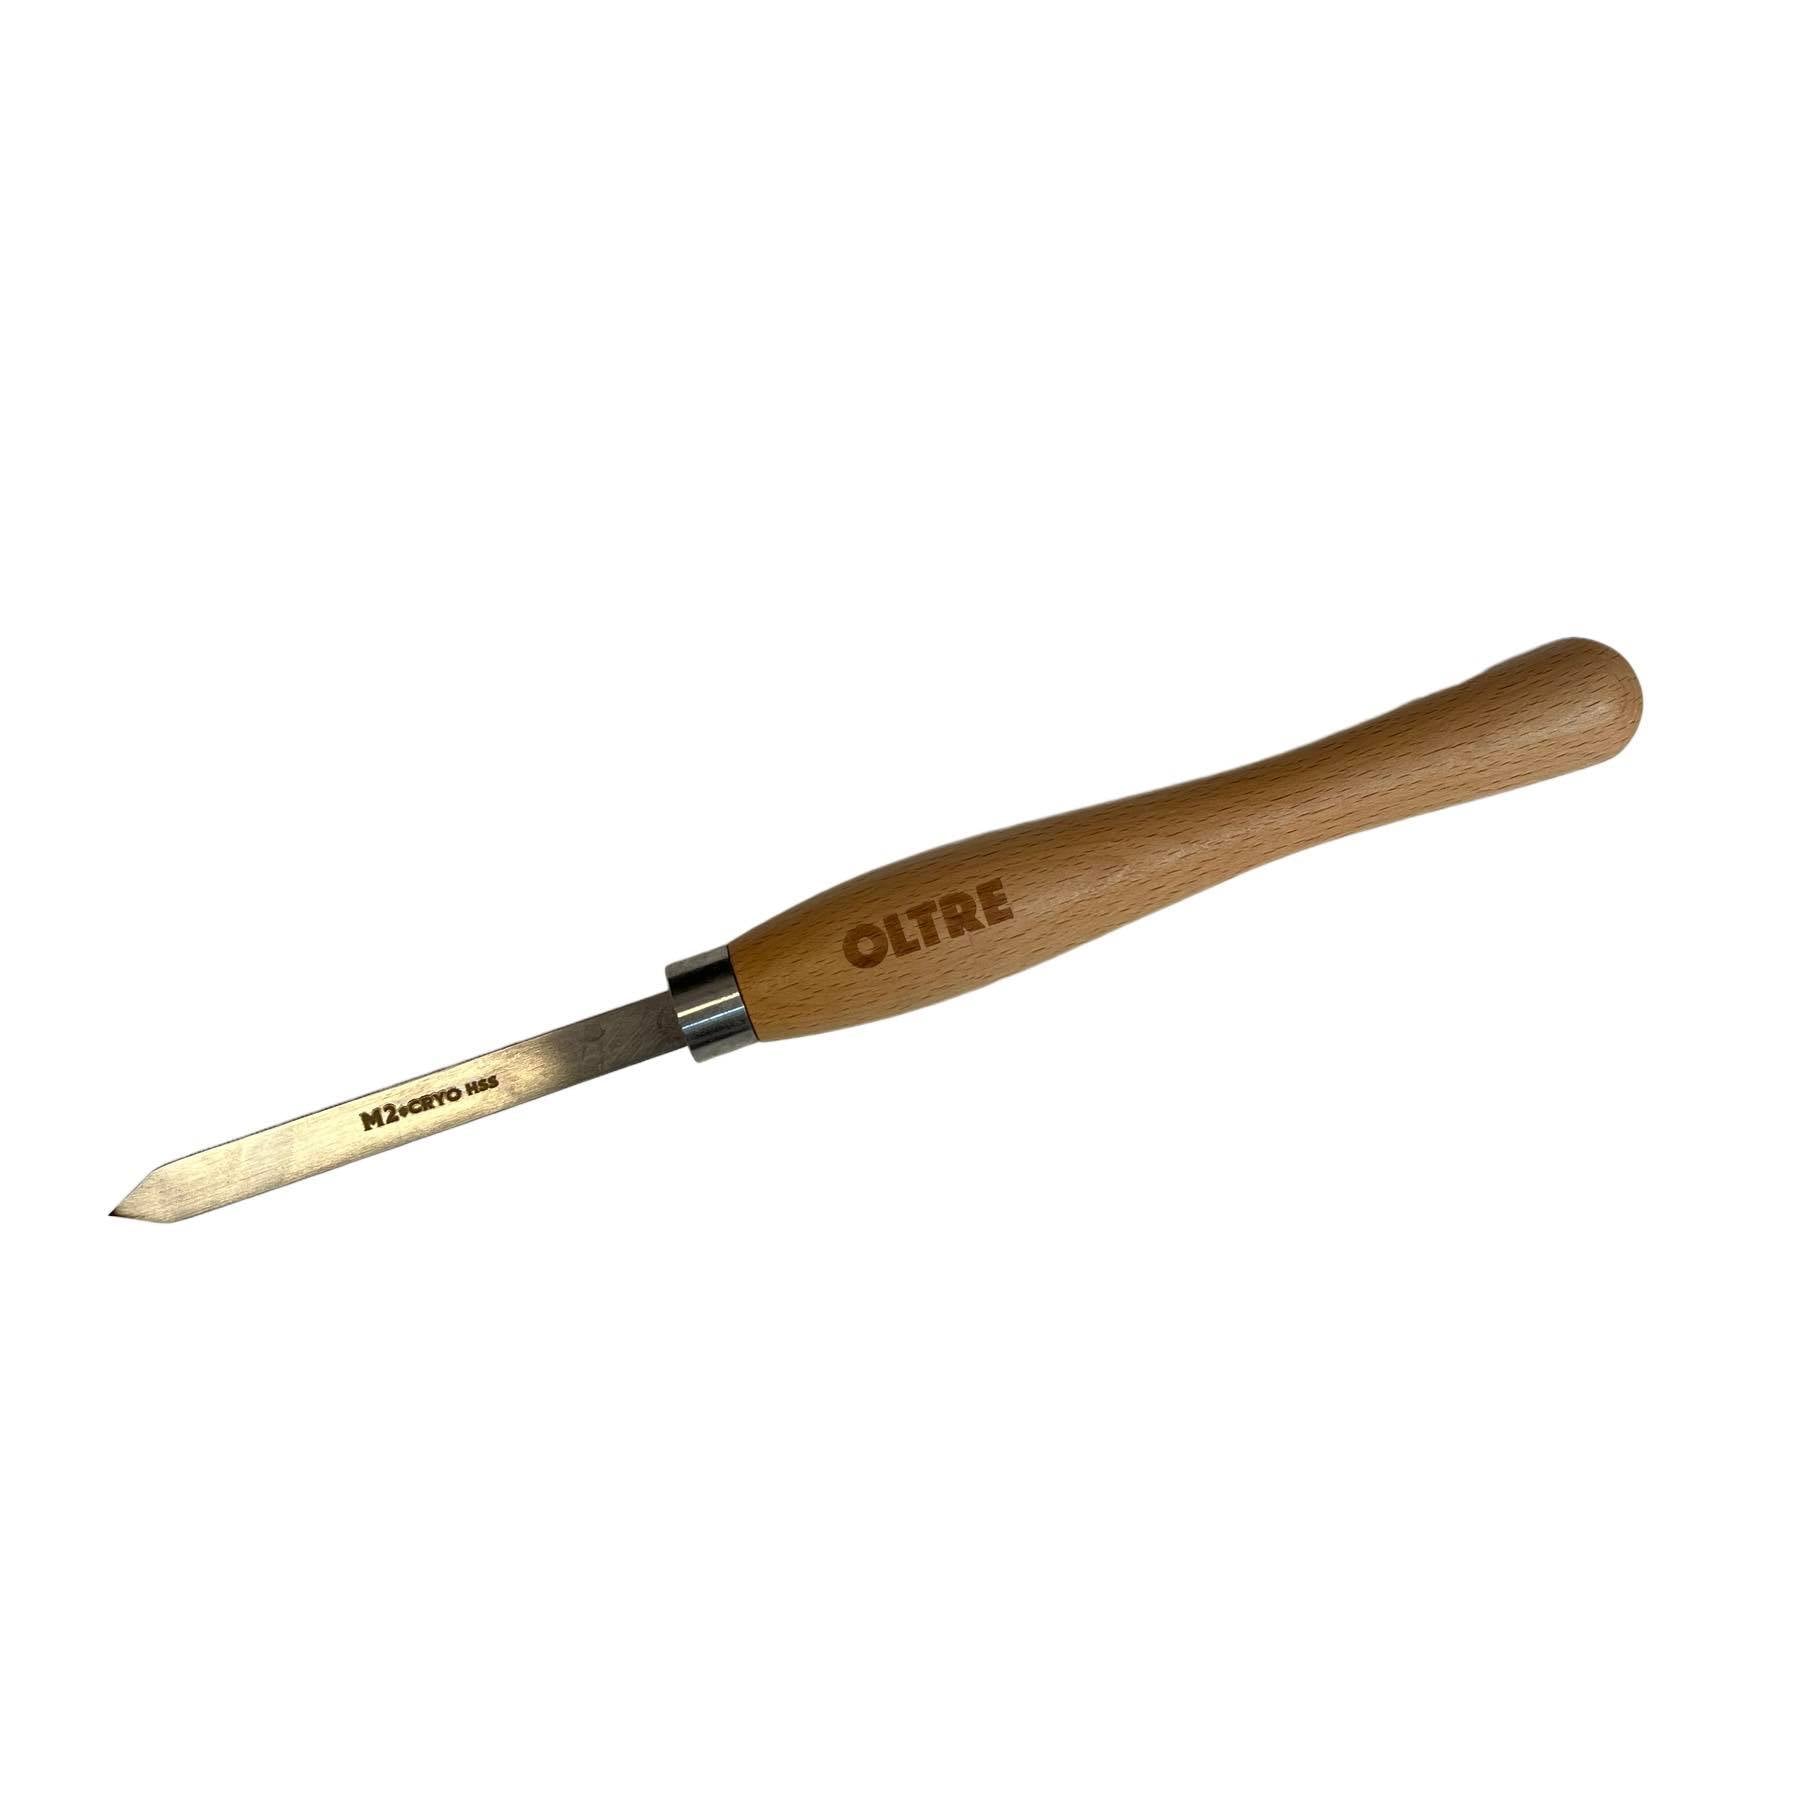 Woodturning Parting Tool 12mm by Oltre